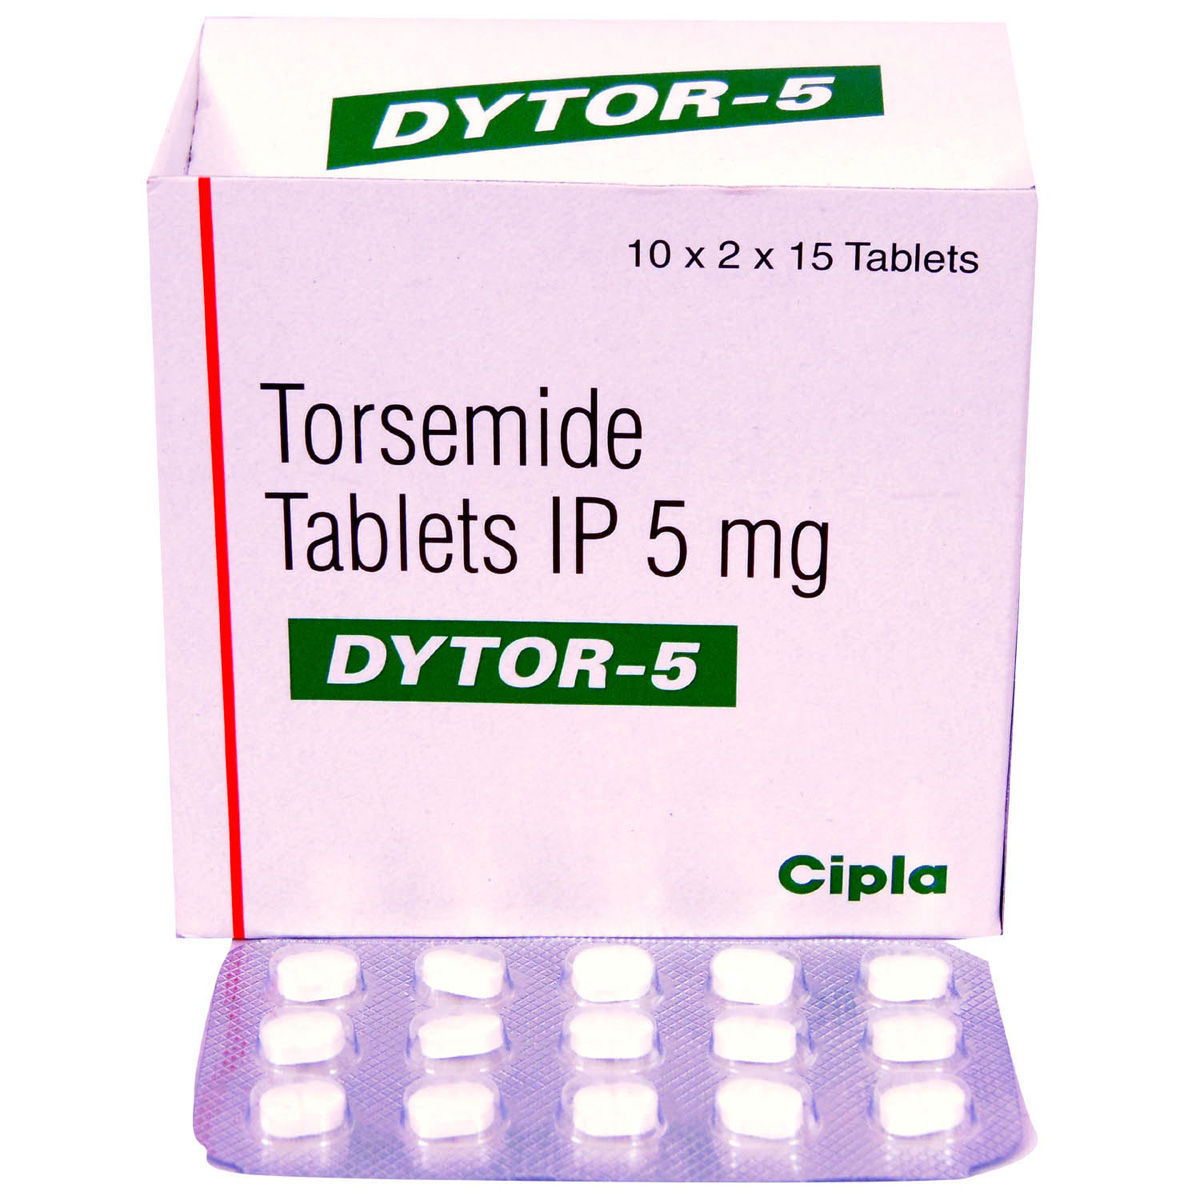 Buy Dytor-5 Tablet 15's Online